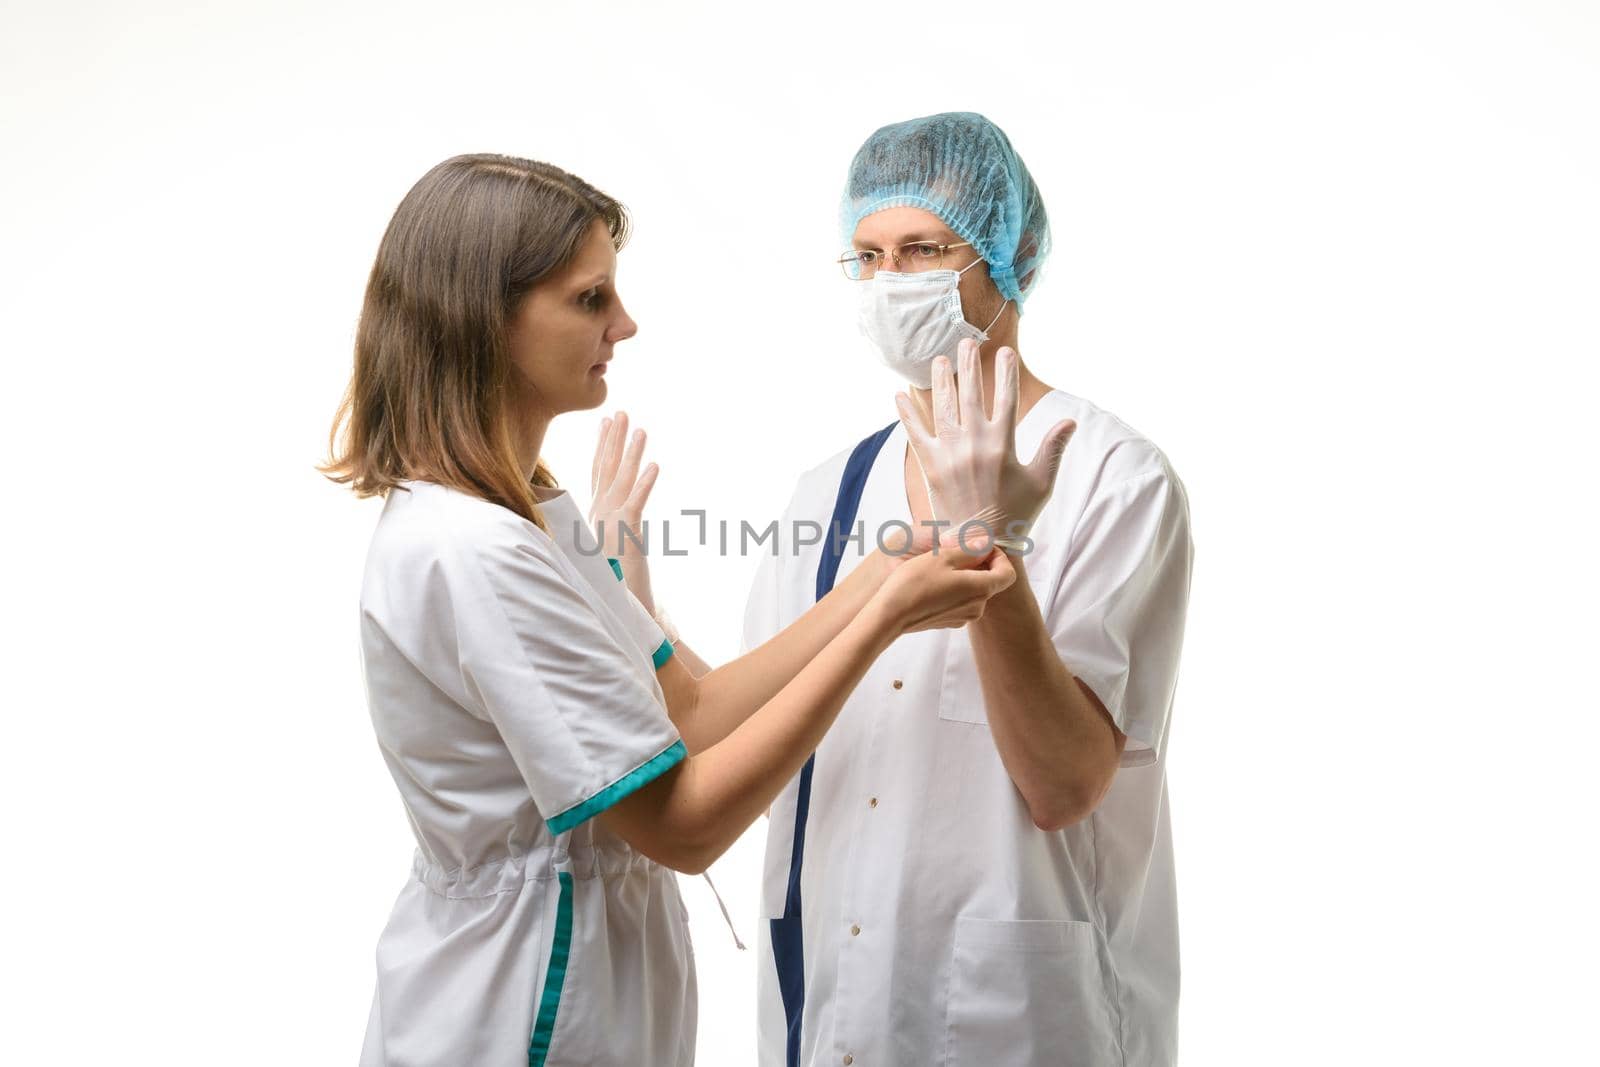 A nurse puts sterile medical gloves on the surgeon's hands